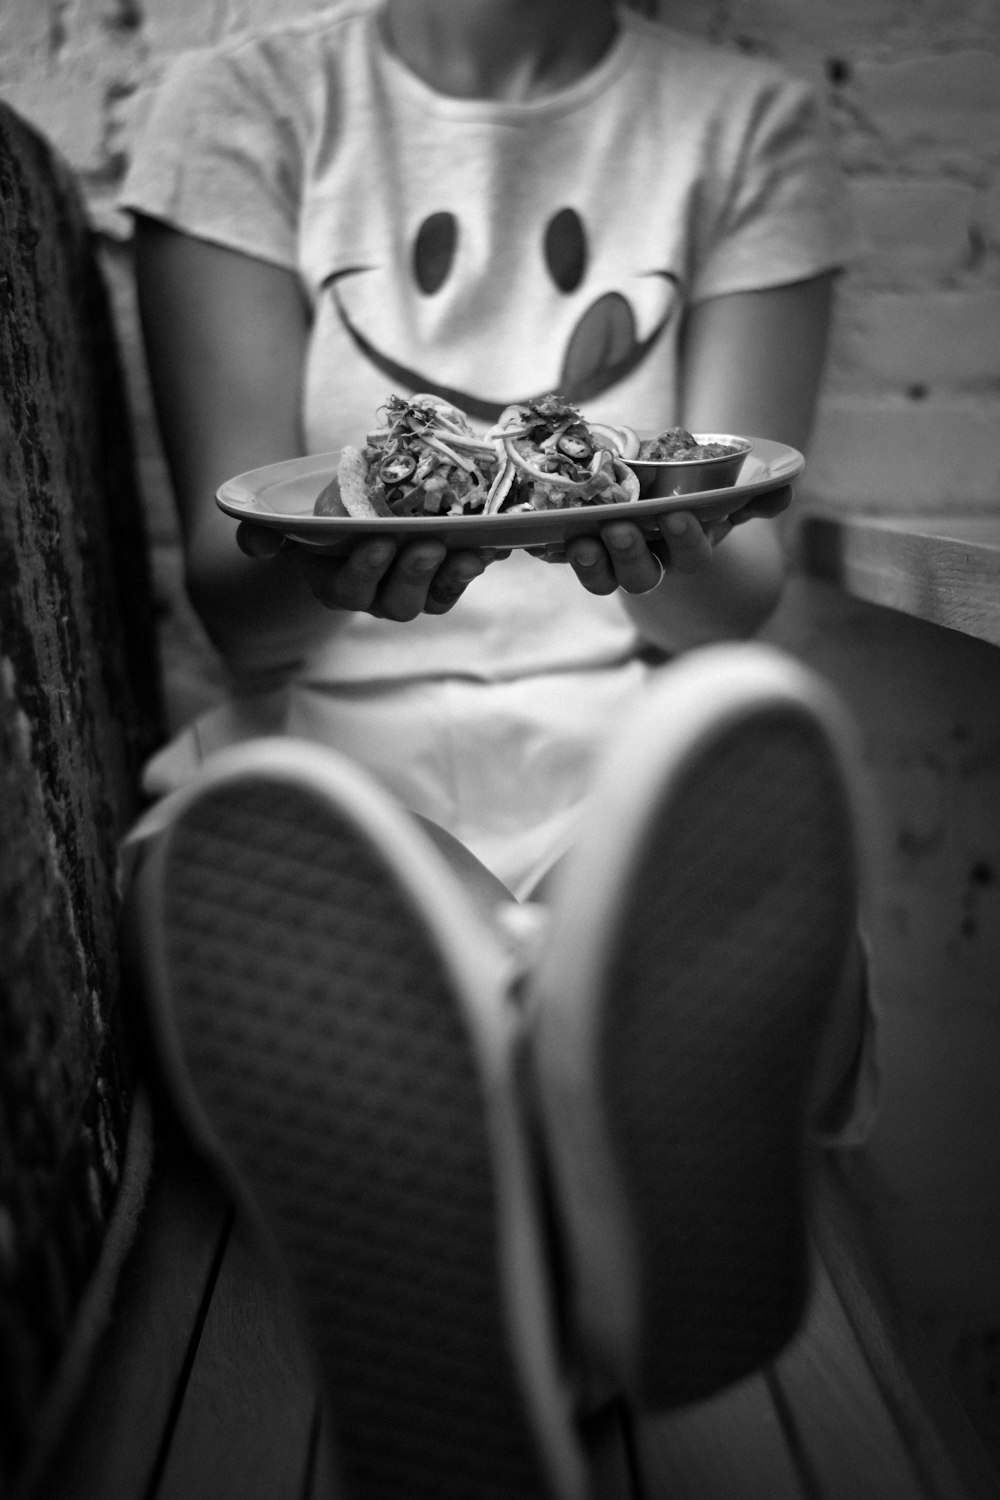 grayscale photography of woman holding plate with food while sitting and leaning near wall